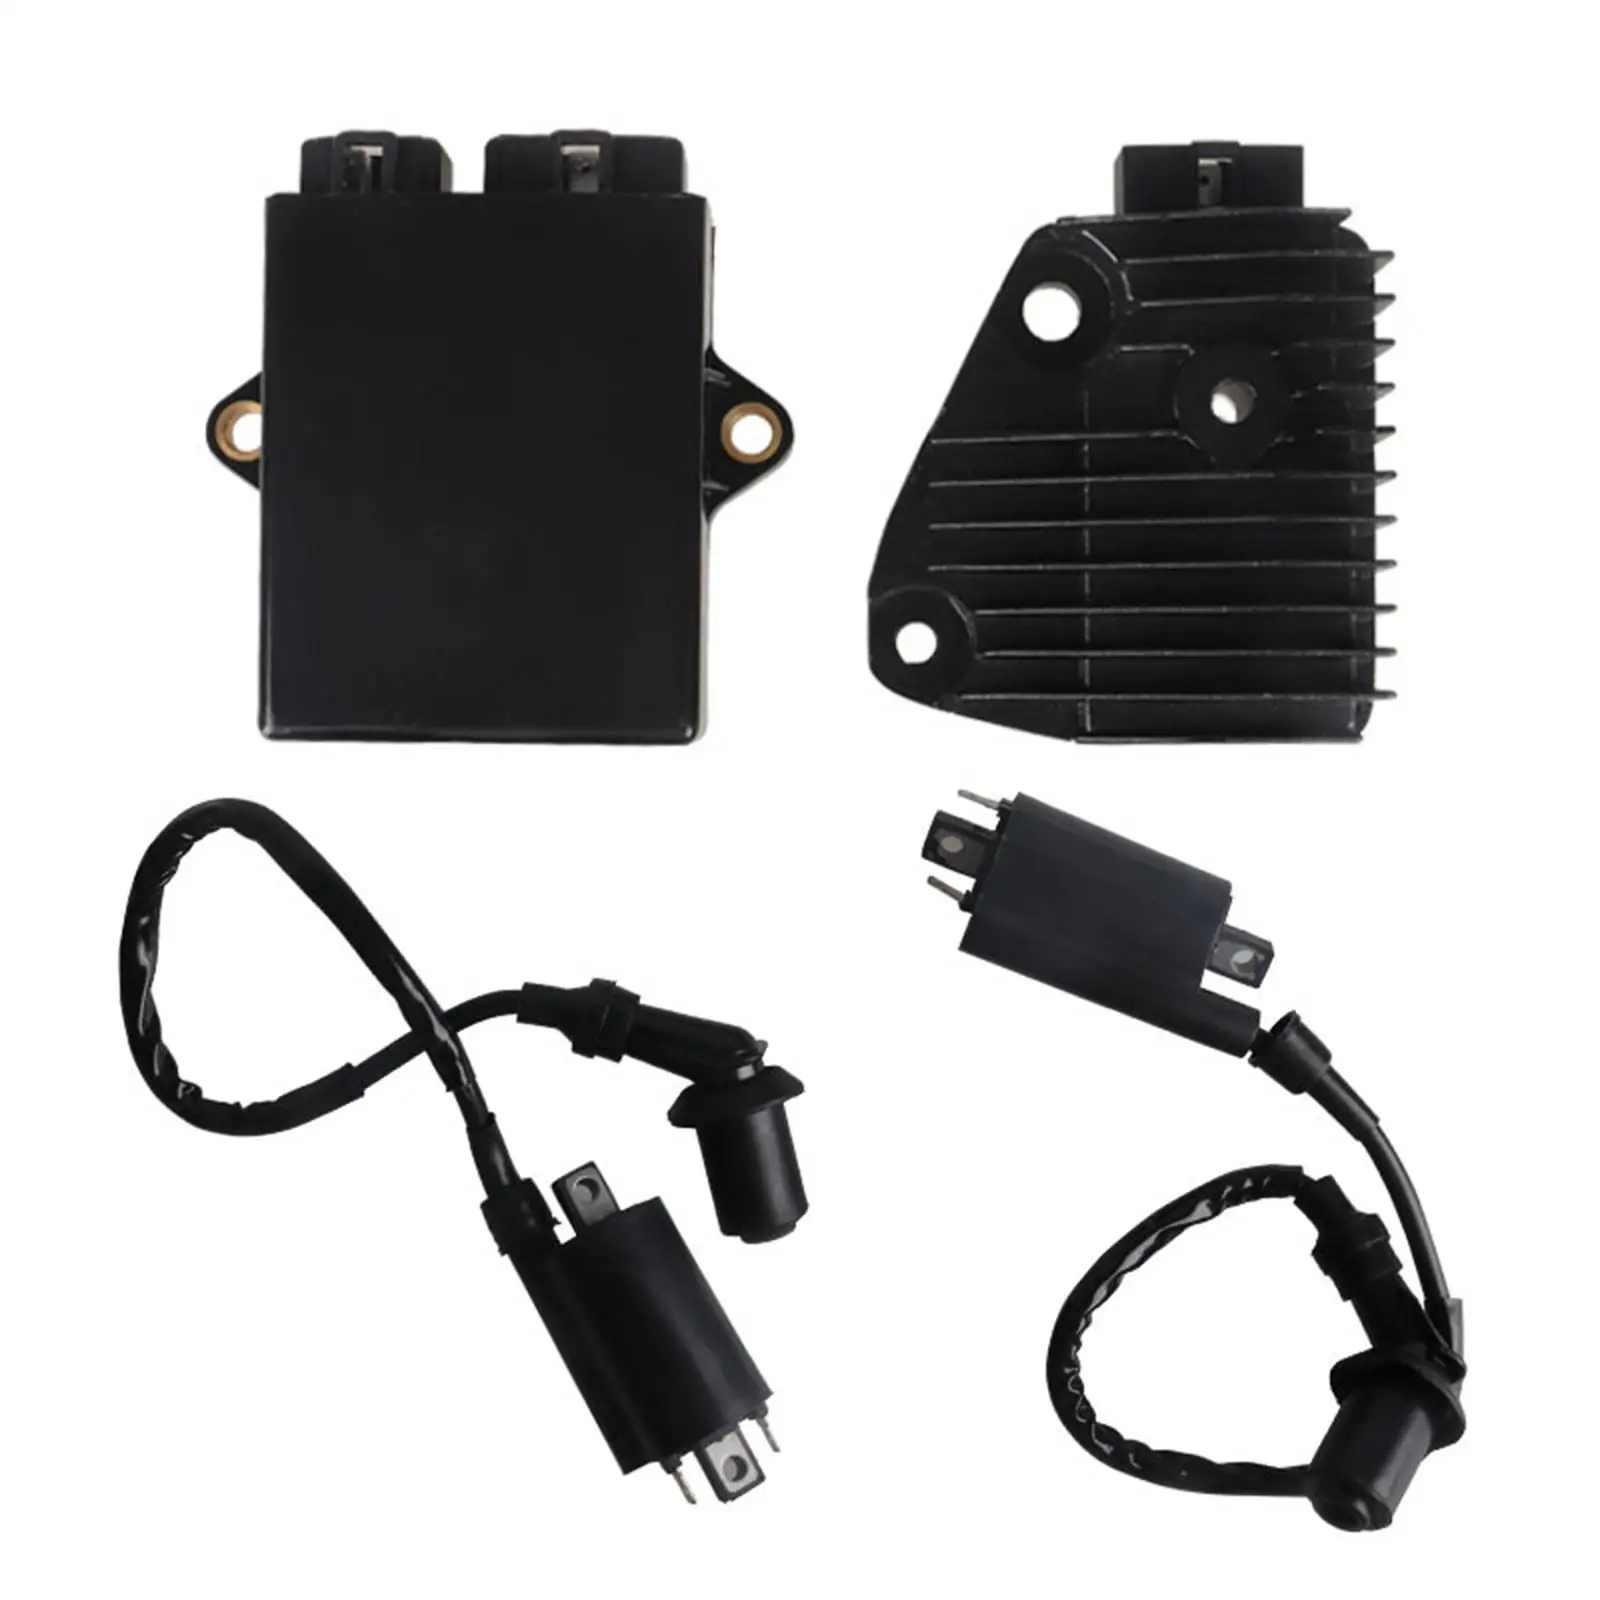 Cdi Ignition Coil Regulator High Performance Motorcycle Parts Replacement for Yamaha XV250 Route 66 XV250 Virago V-star 250